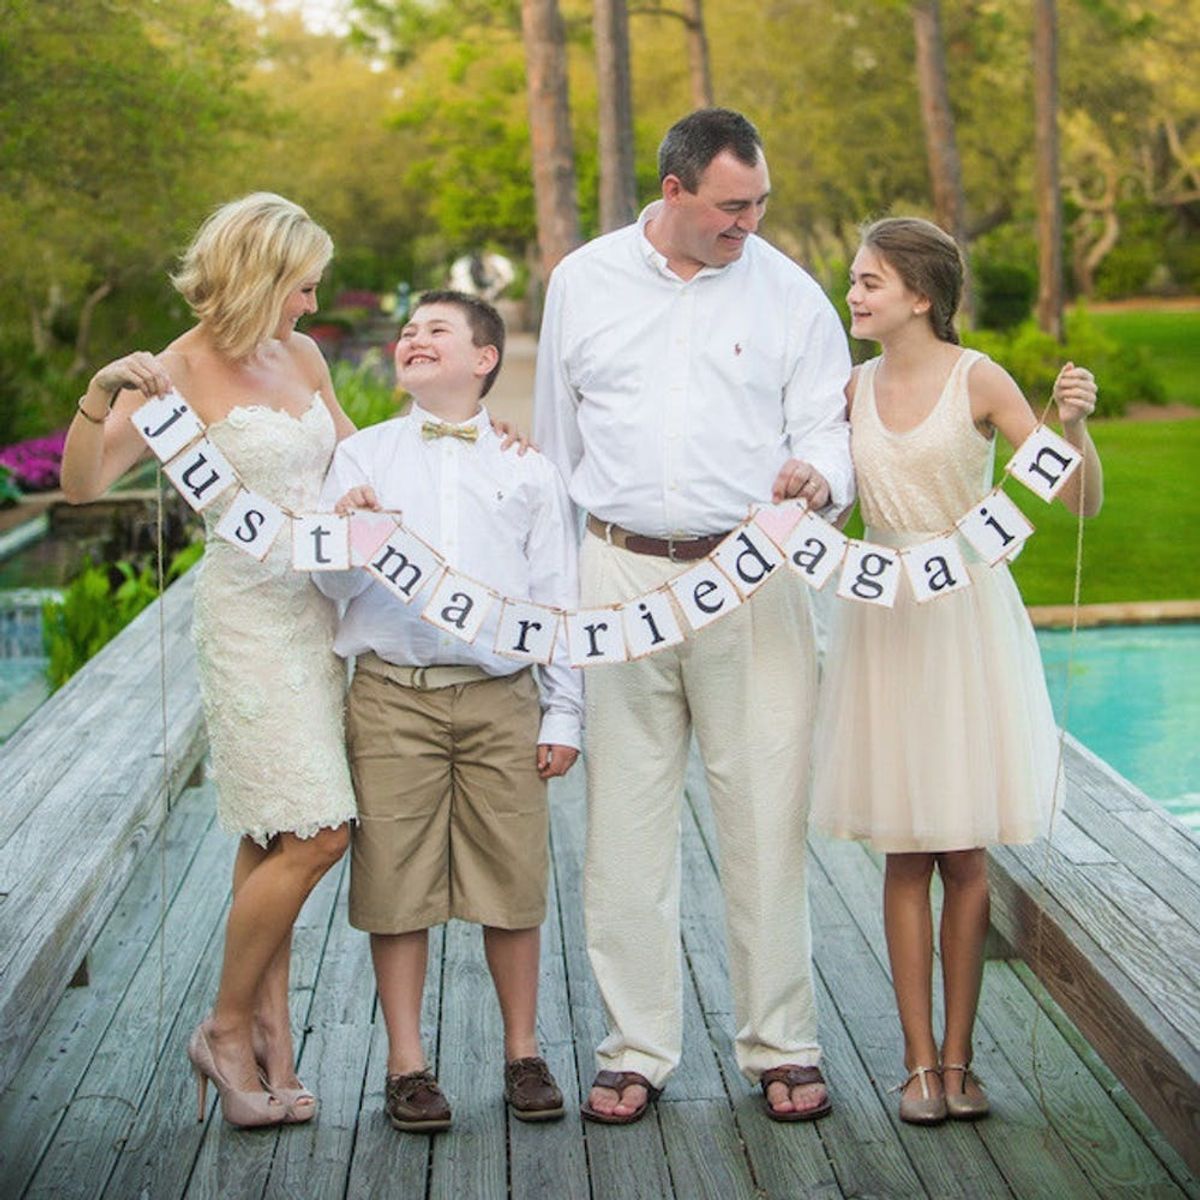 11 Ideas for the Sweetest Vow Renewal Ceremony